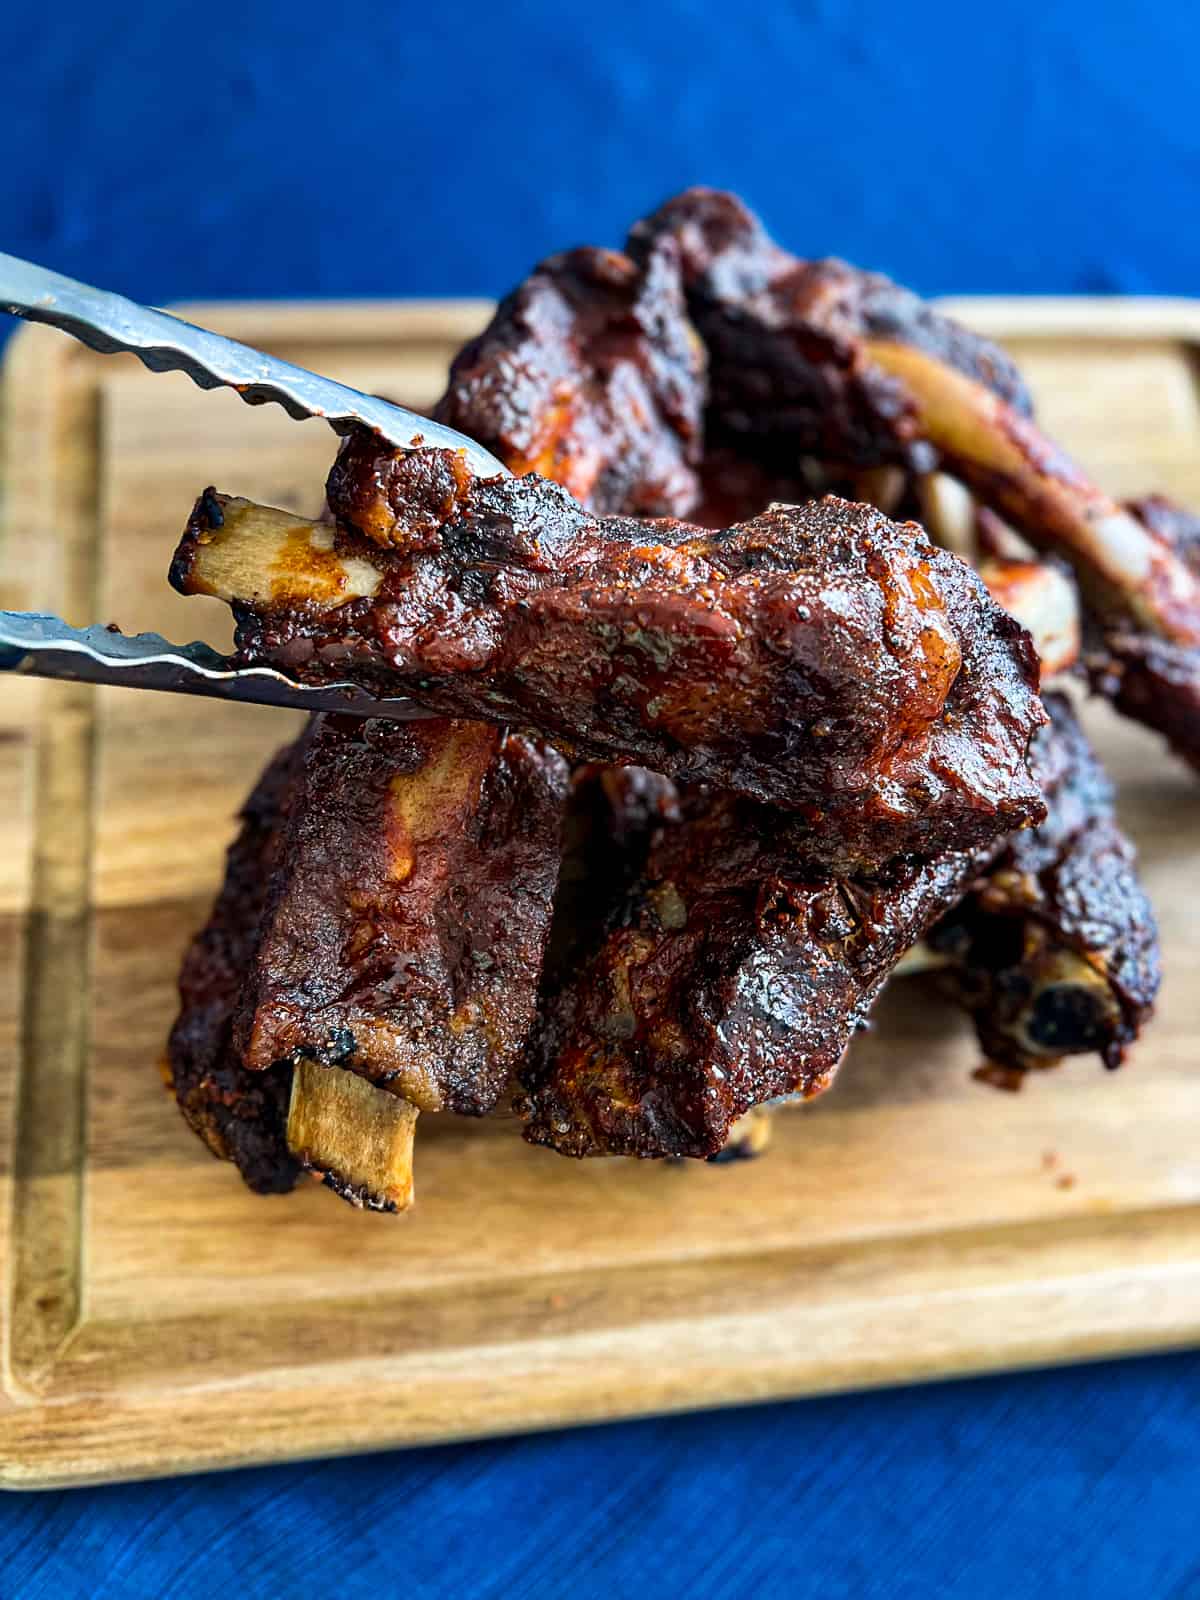 Tongs holding BBQ Beef Back Ribs